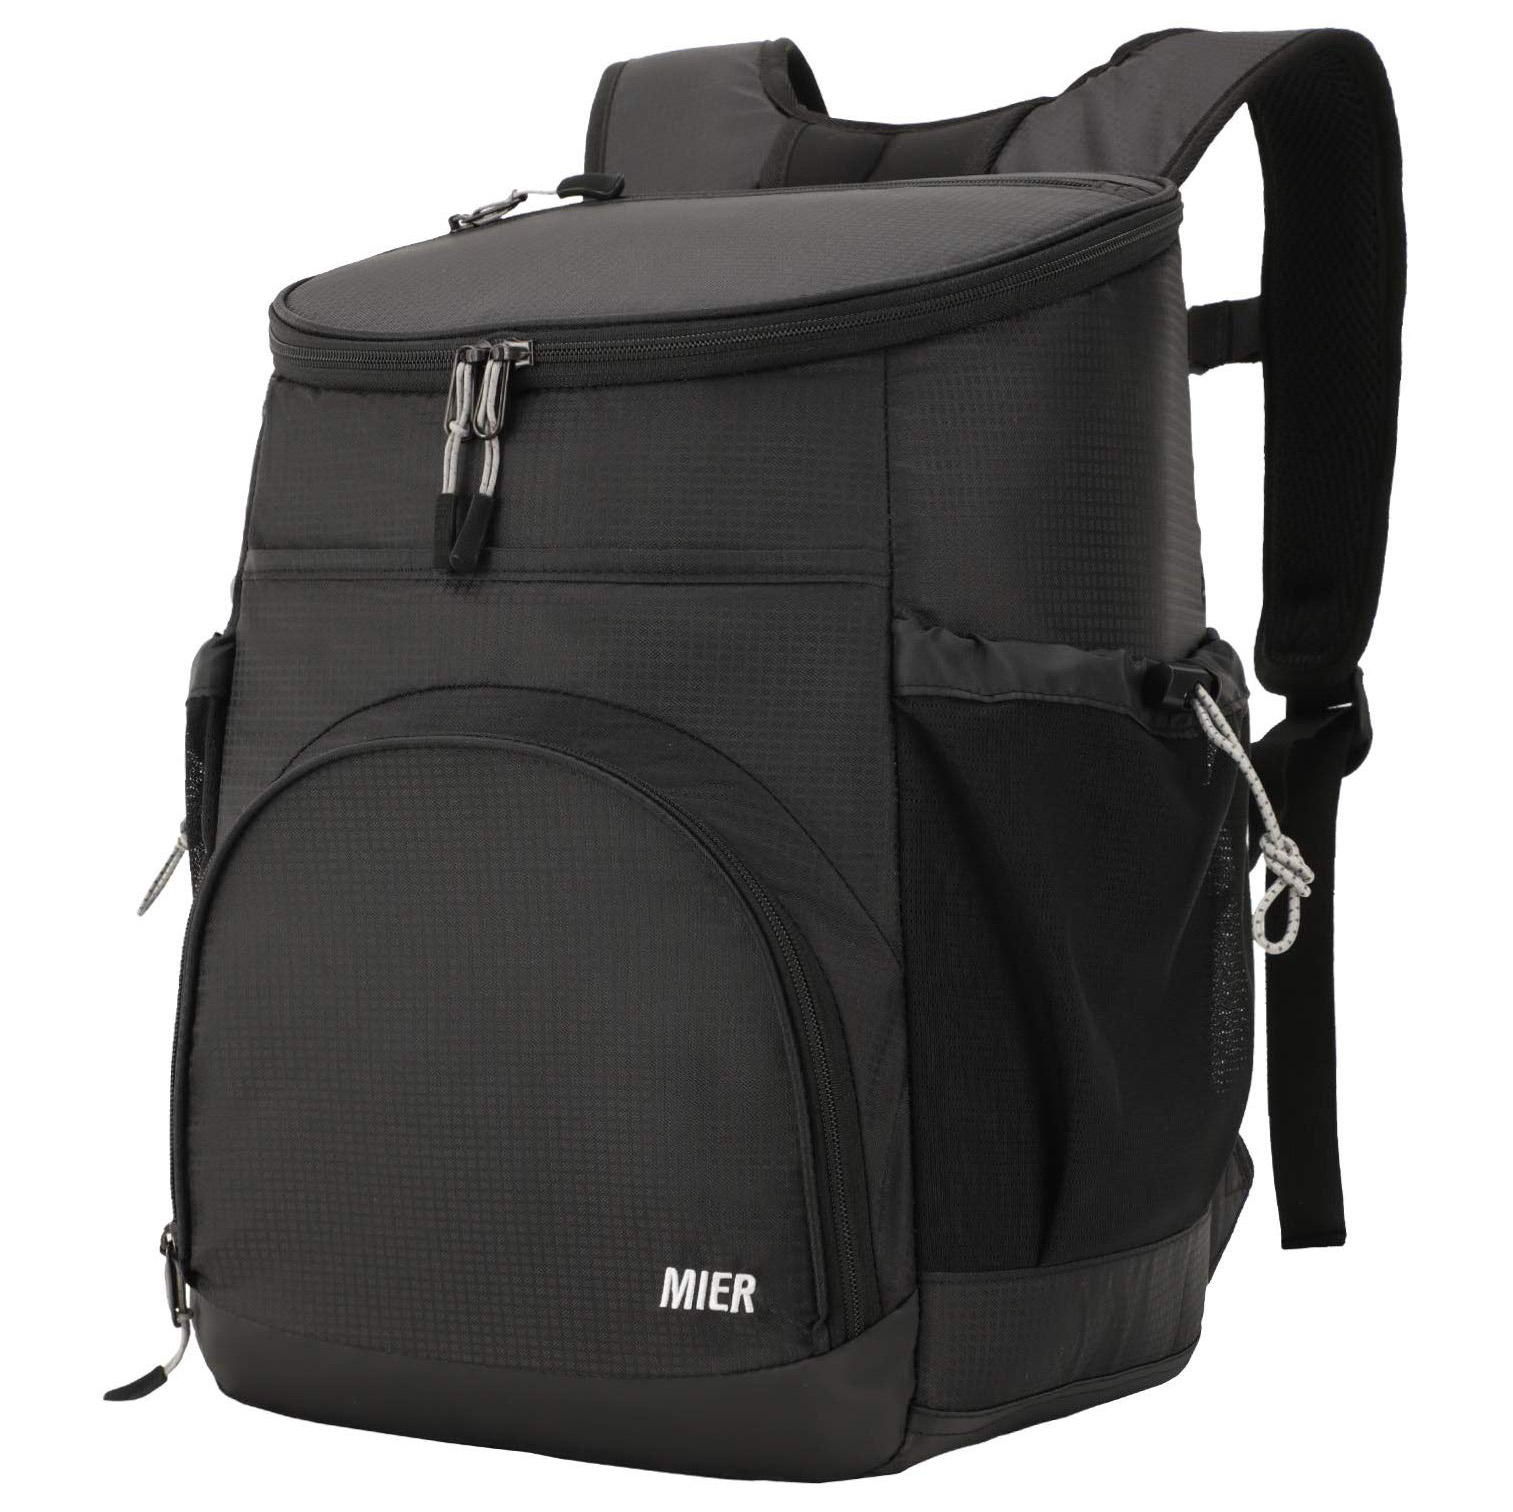 MIER Leakproof Backpack Cooler with iPad, Tablet Pocket for Work, Picnic, Hiking, Day Trips